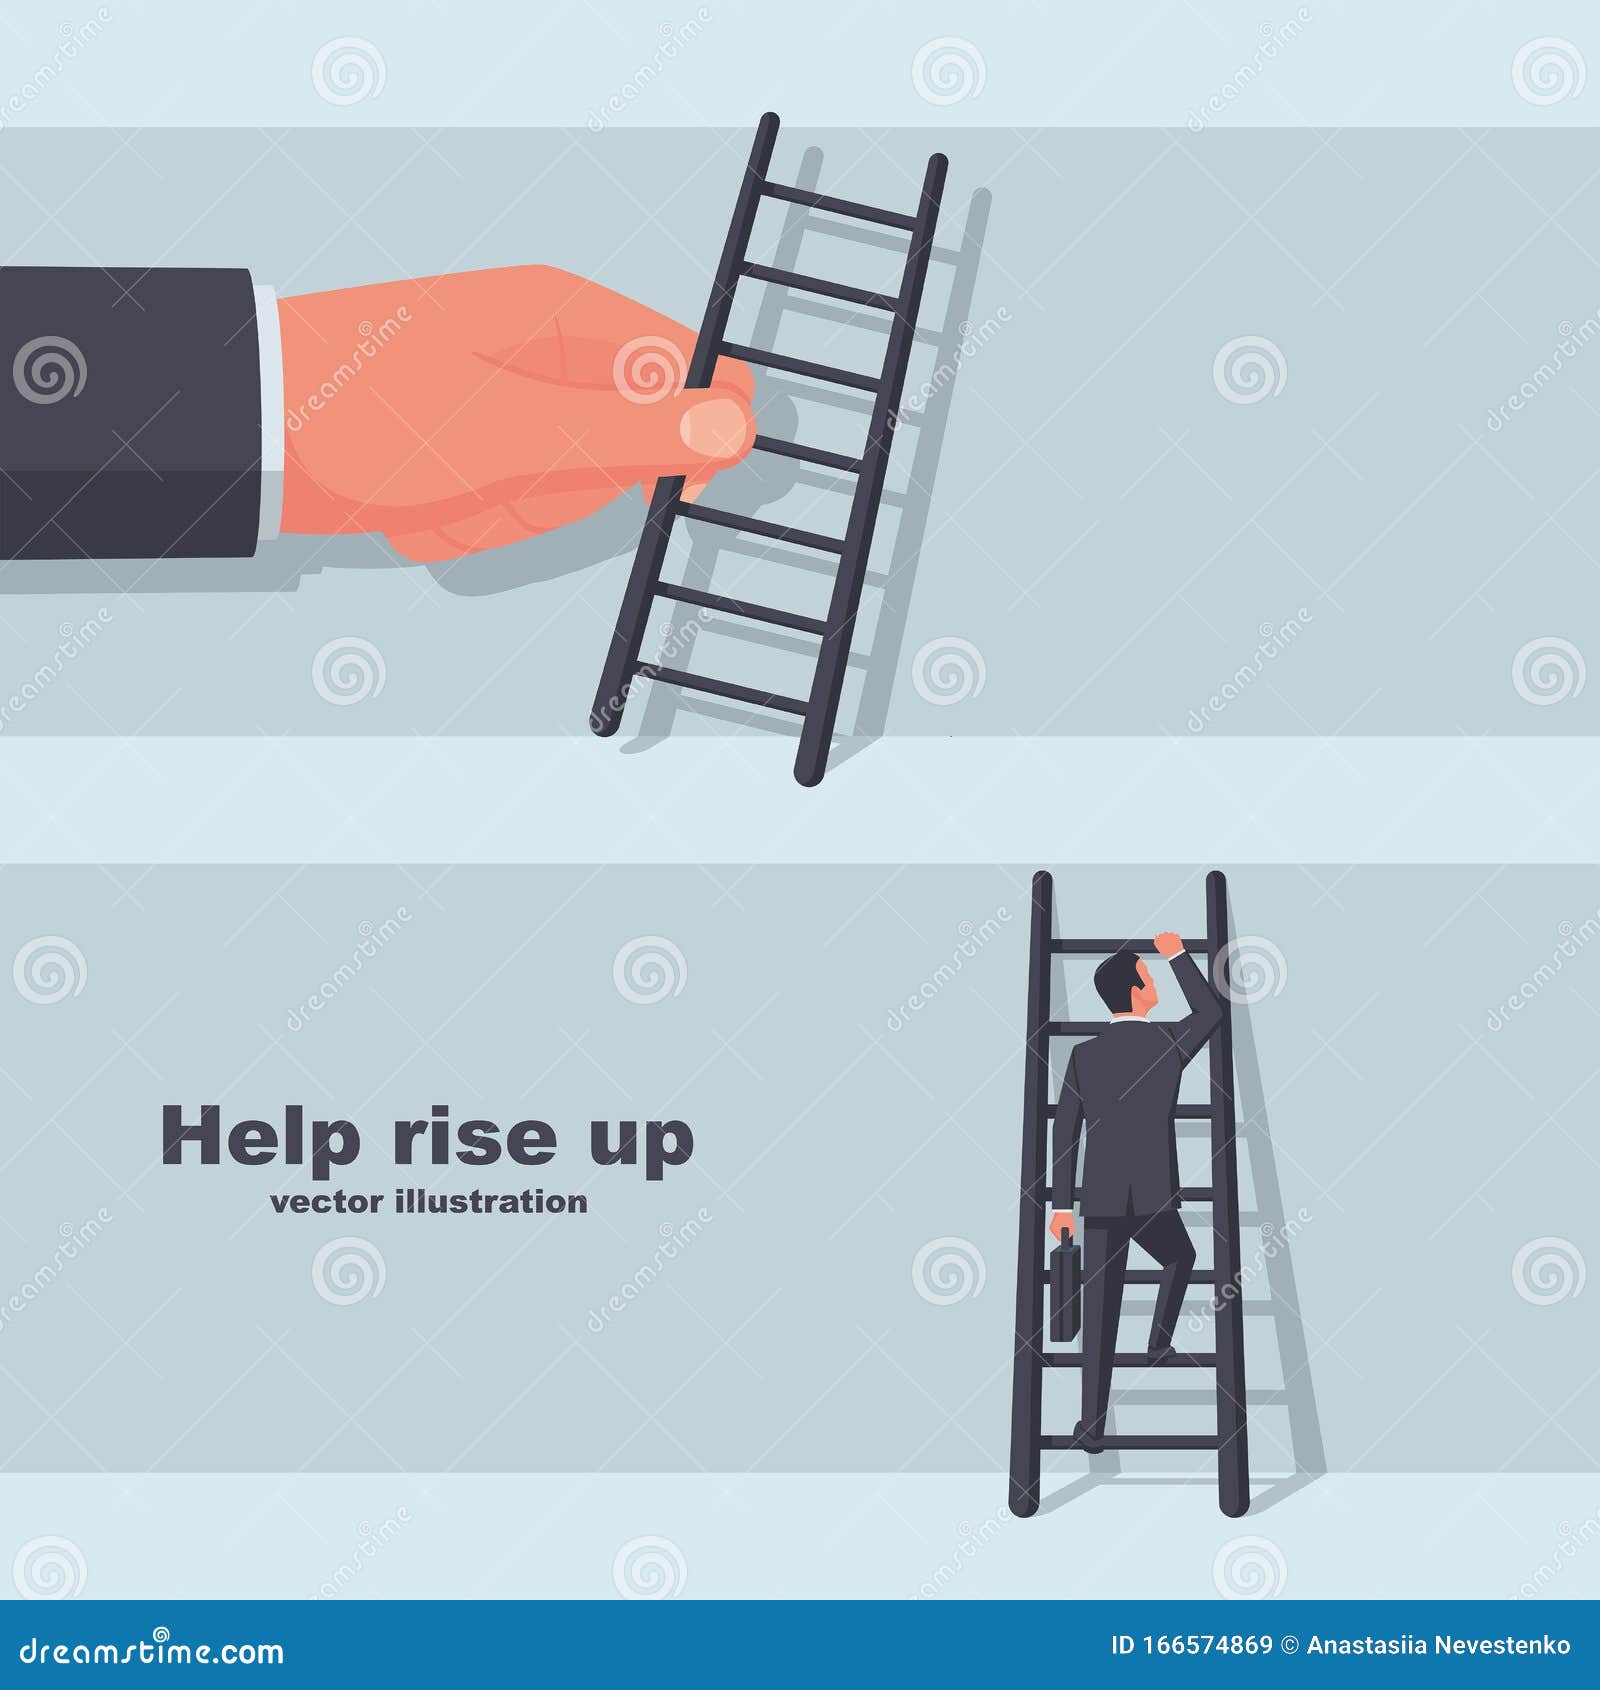 help up concept. lider person helps a partner climb the career ladder